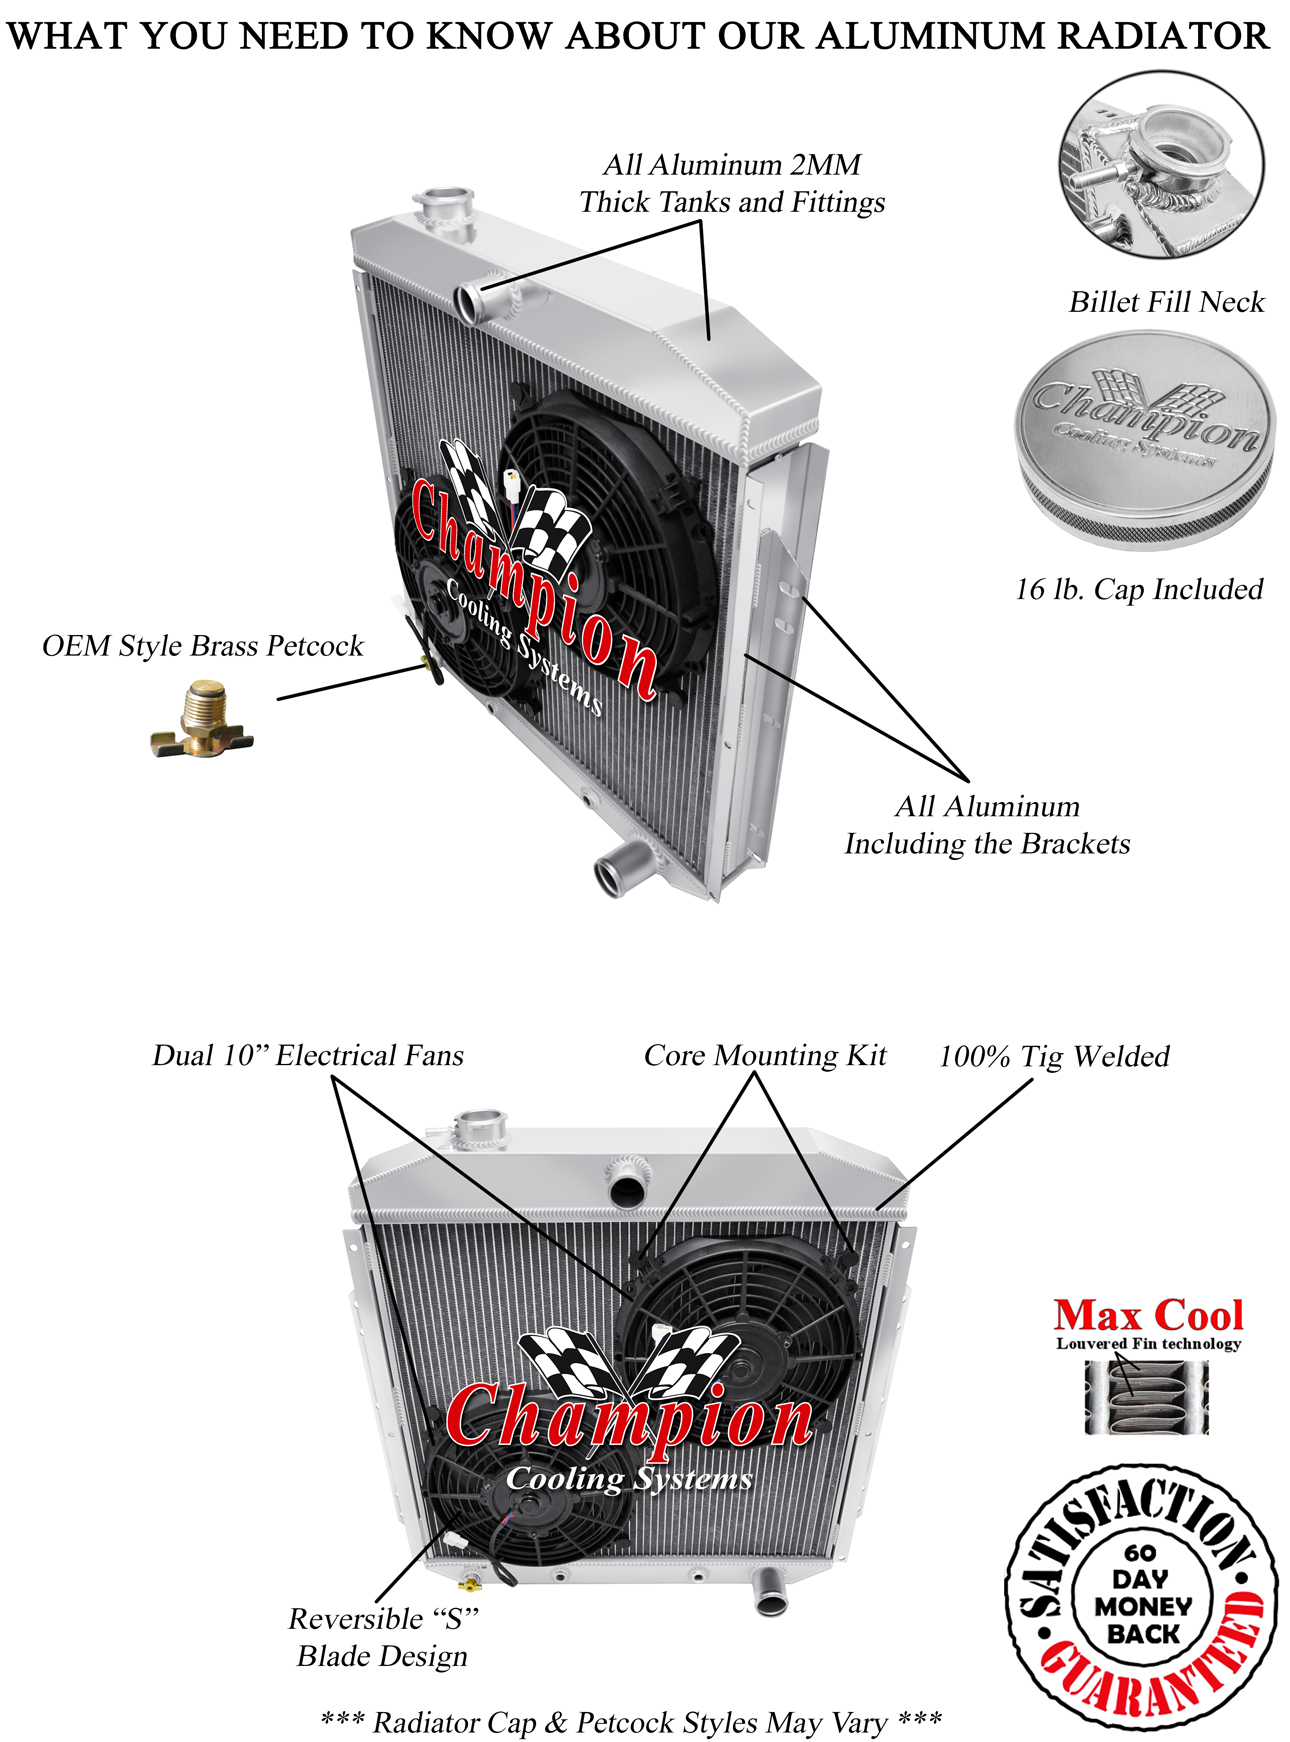 DR Champion 3 Row Radiator Chevy Config W/ 2 10" Fans for 1953 - 1956 Ford Truck